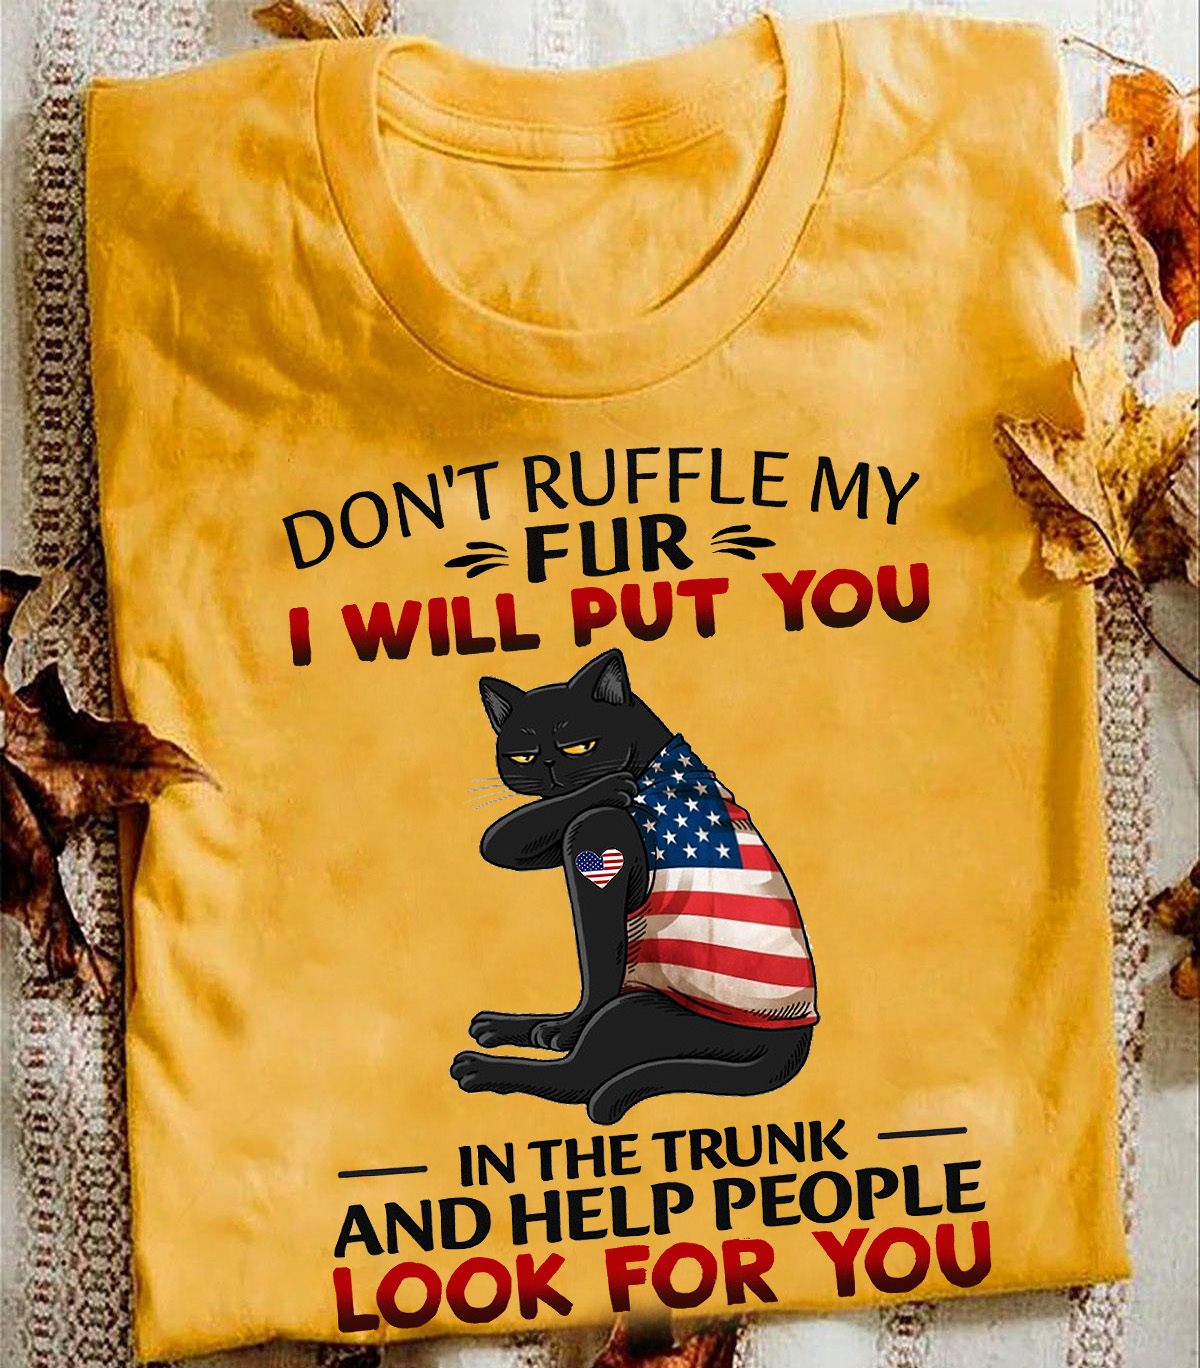 Don't ruffle my fur I will put you in the trunk - America flag